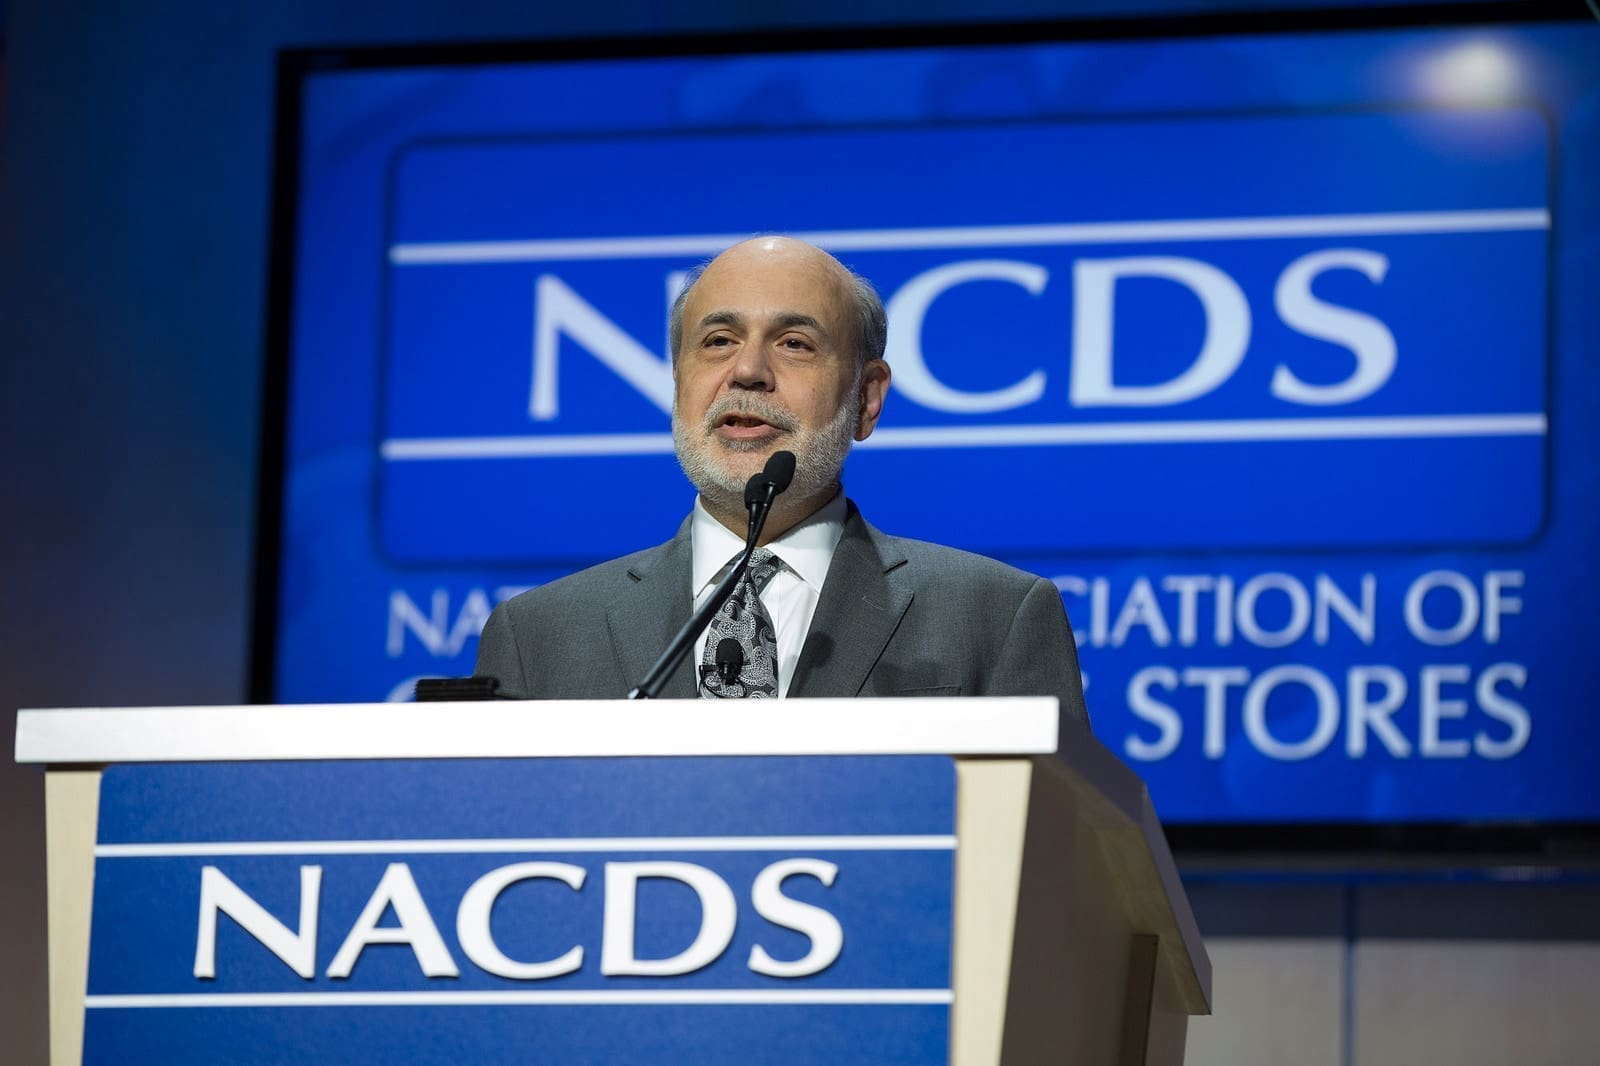 Dr. Ben S. Bernanke, former chairman of the Federal Reserve, has a new book out, "The Courage to Act." He delivered the keynote remarks at the 2014 NACDS Total Store Expo.